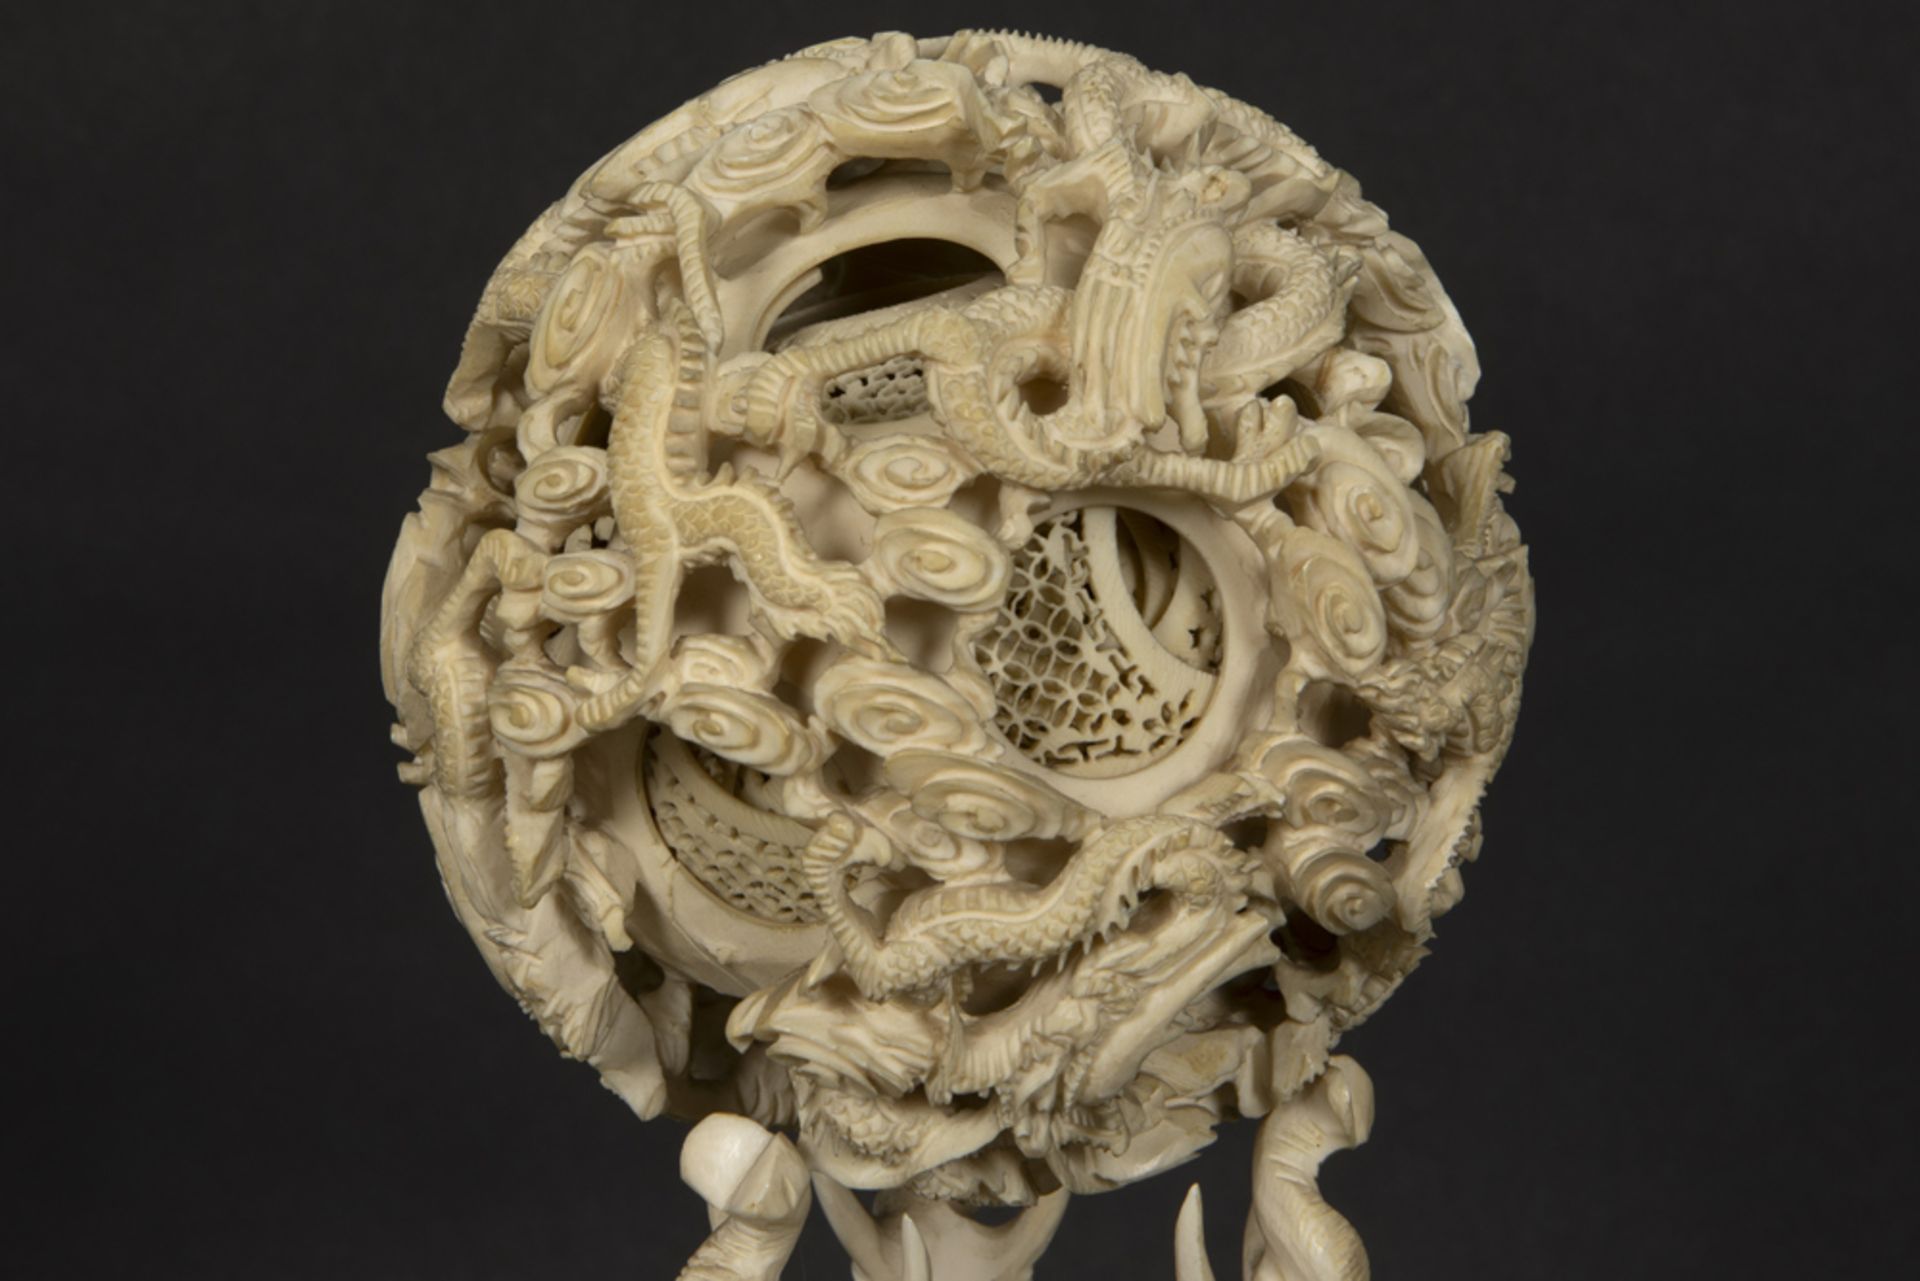 19th Cent. Chinese Qing period "Canton Ball" on a stand with elephants - typical fine Cantonese work - Bild 4 aus 5